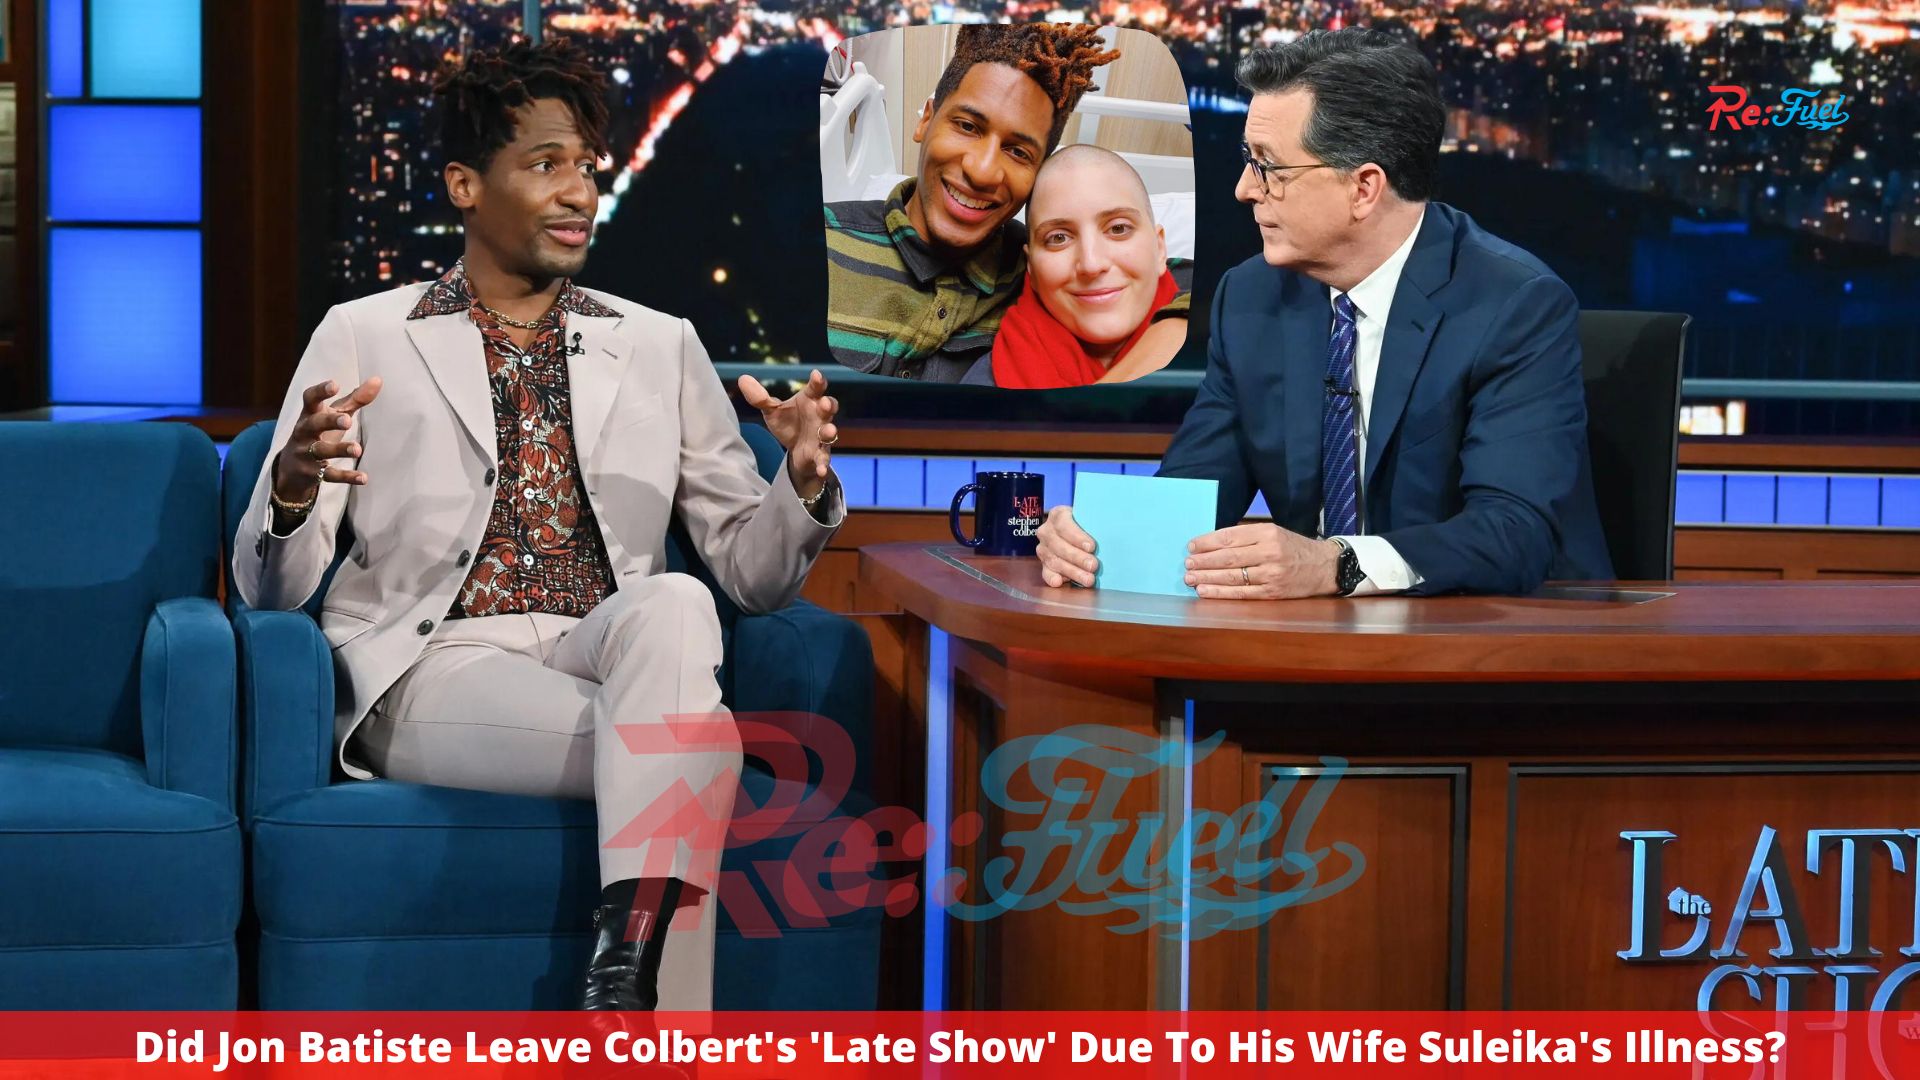 Did Jon Batiste Leave Colbert's 'Late Show' Due To His Wife Suleika's Illness?